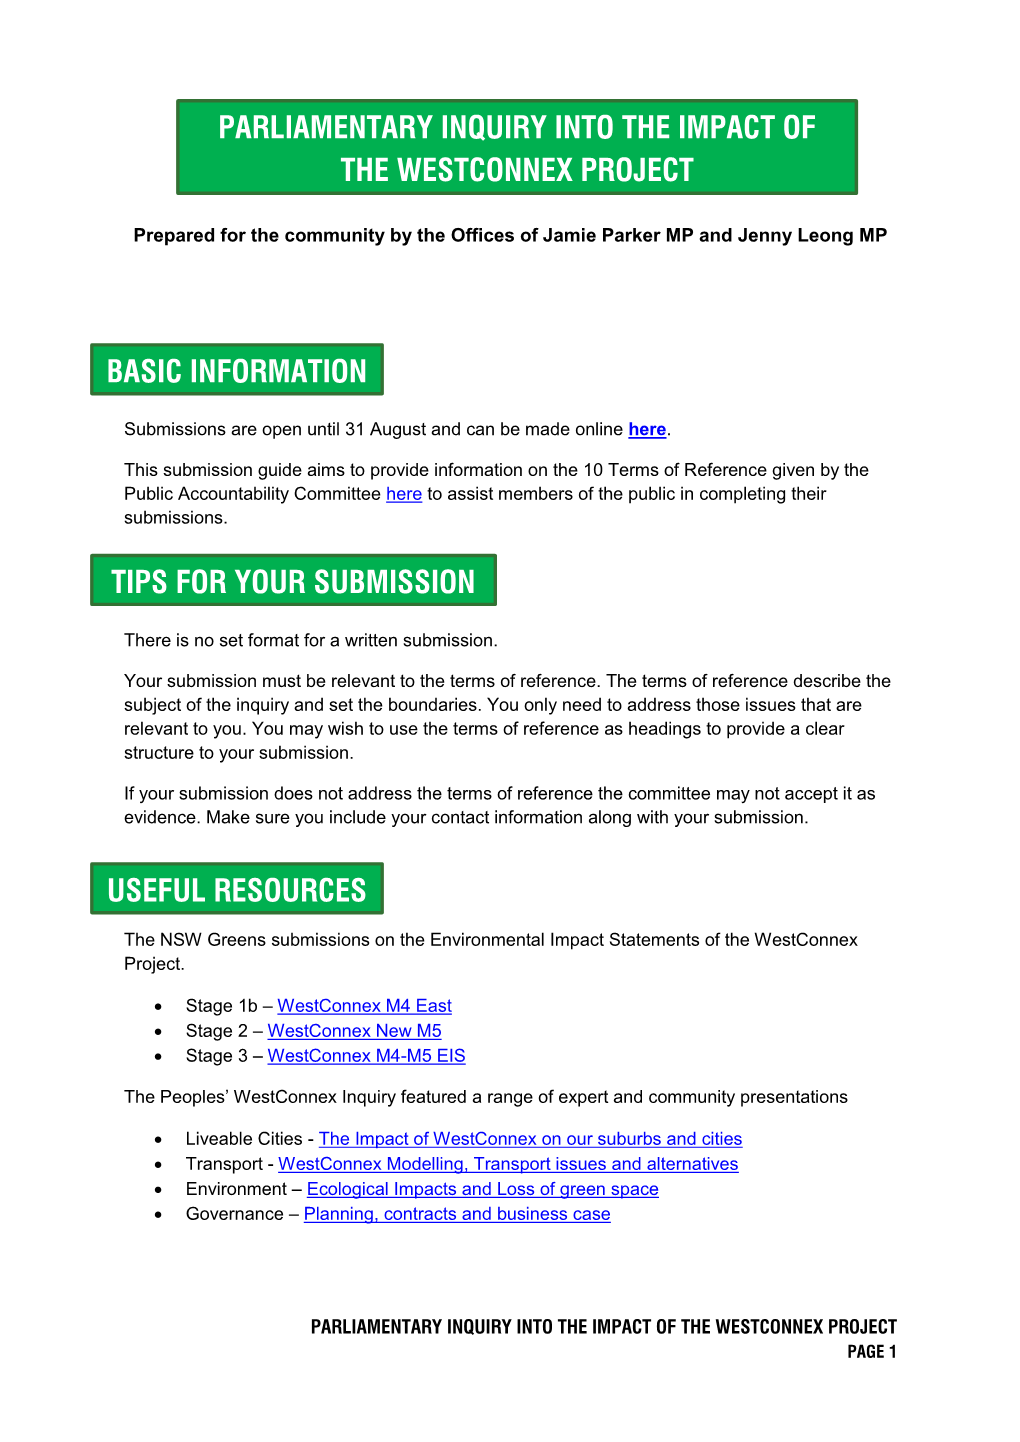 Basic Information Useful Resources Tips for Your Submission Parliamentary